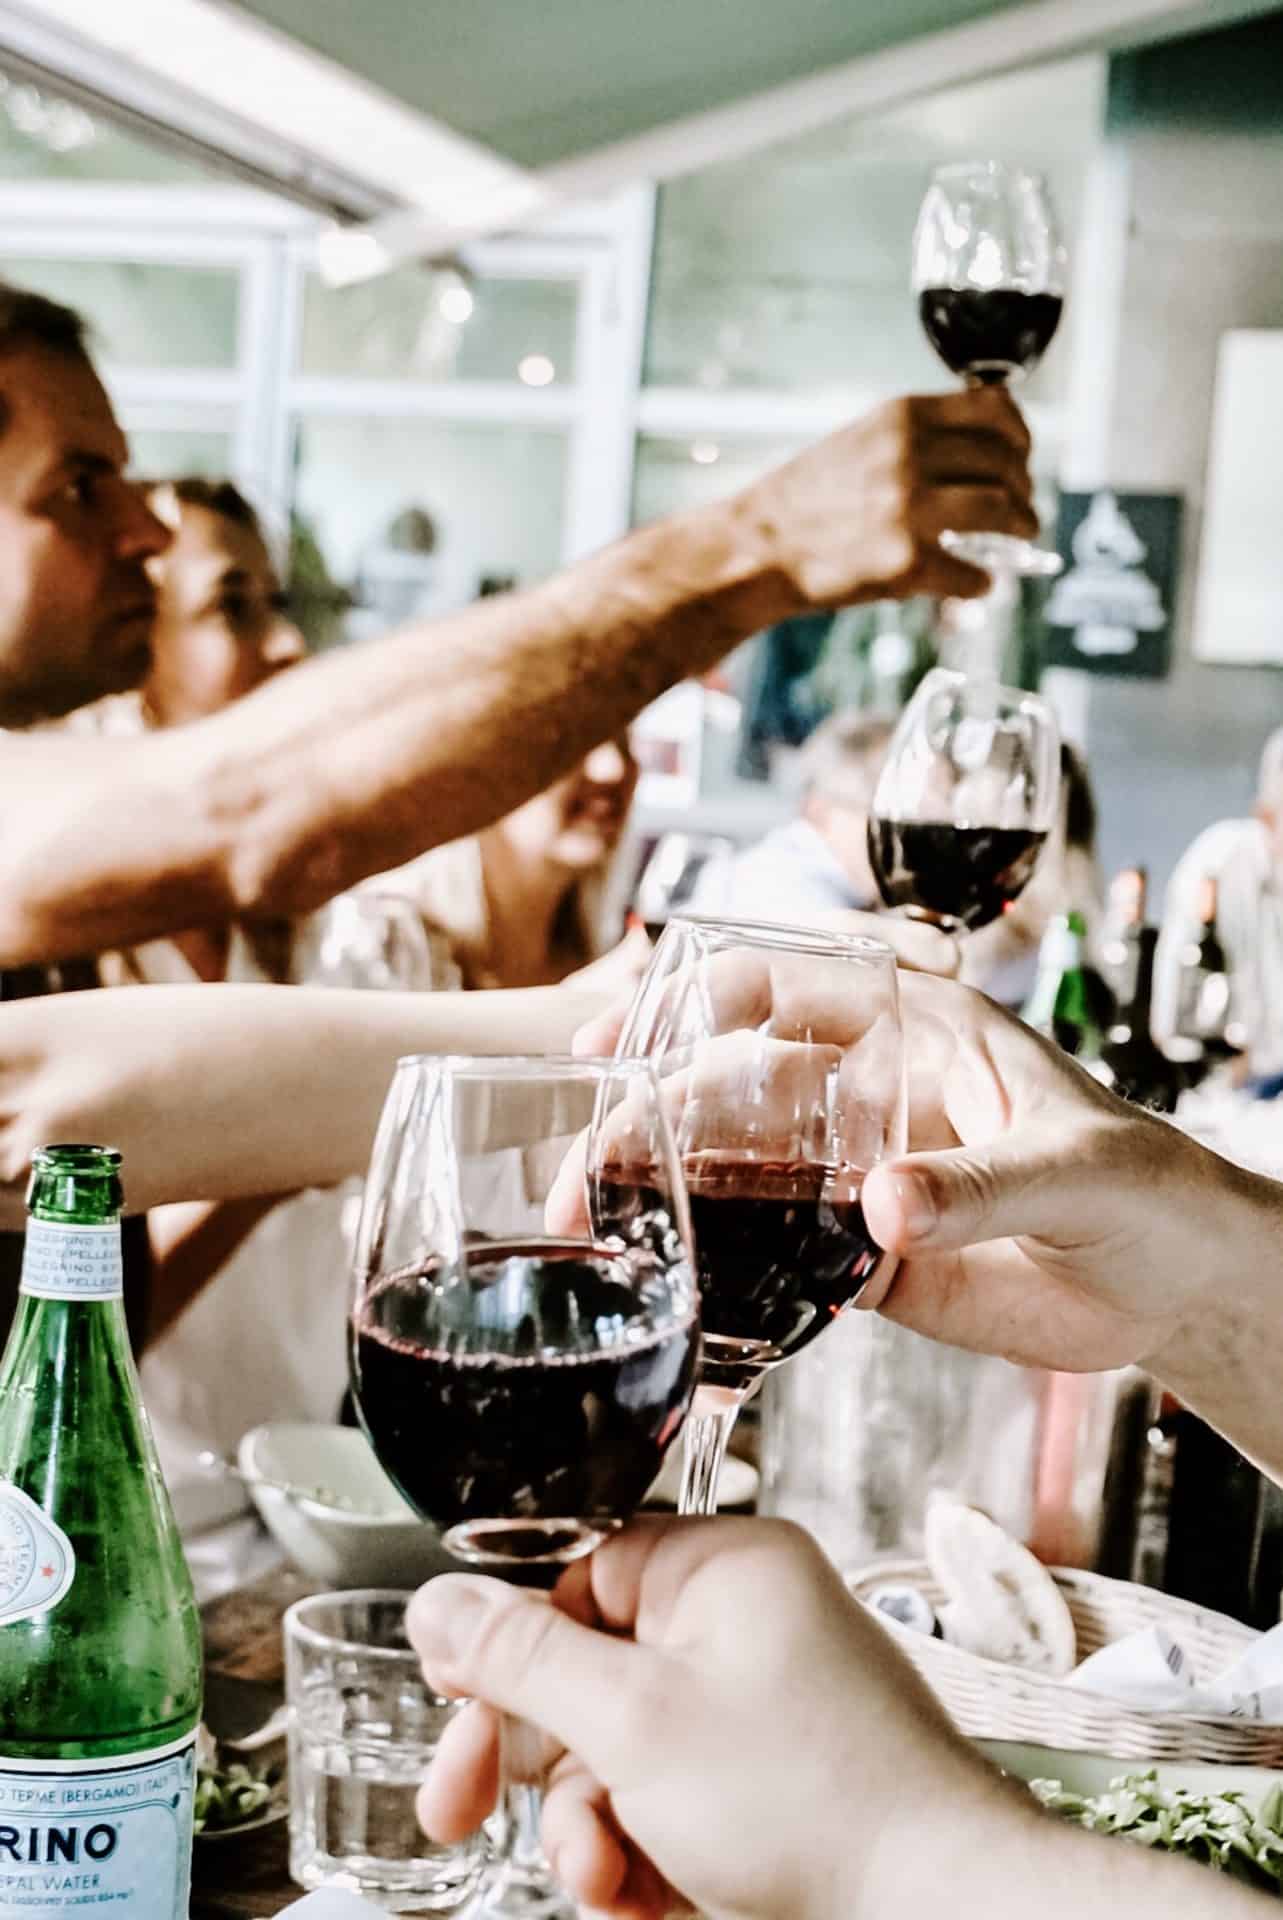 5 ways to drink wine more sustainably